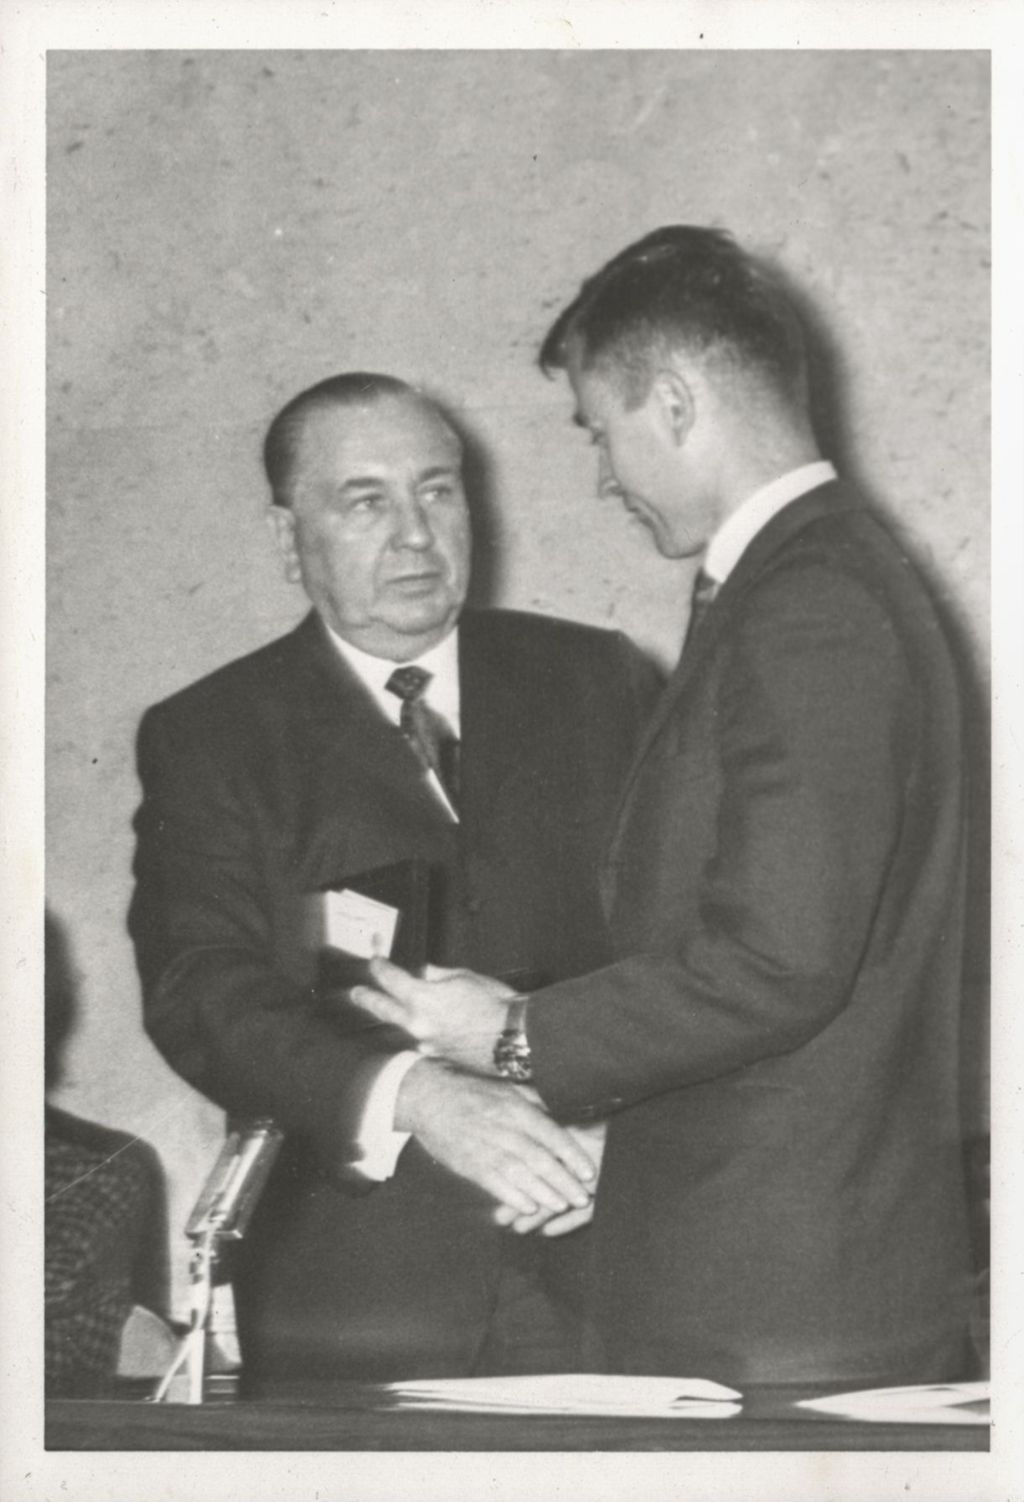 Miniature of Richard J. Daley presents award to astronaut Young